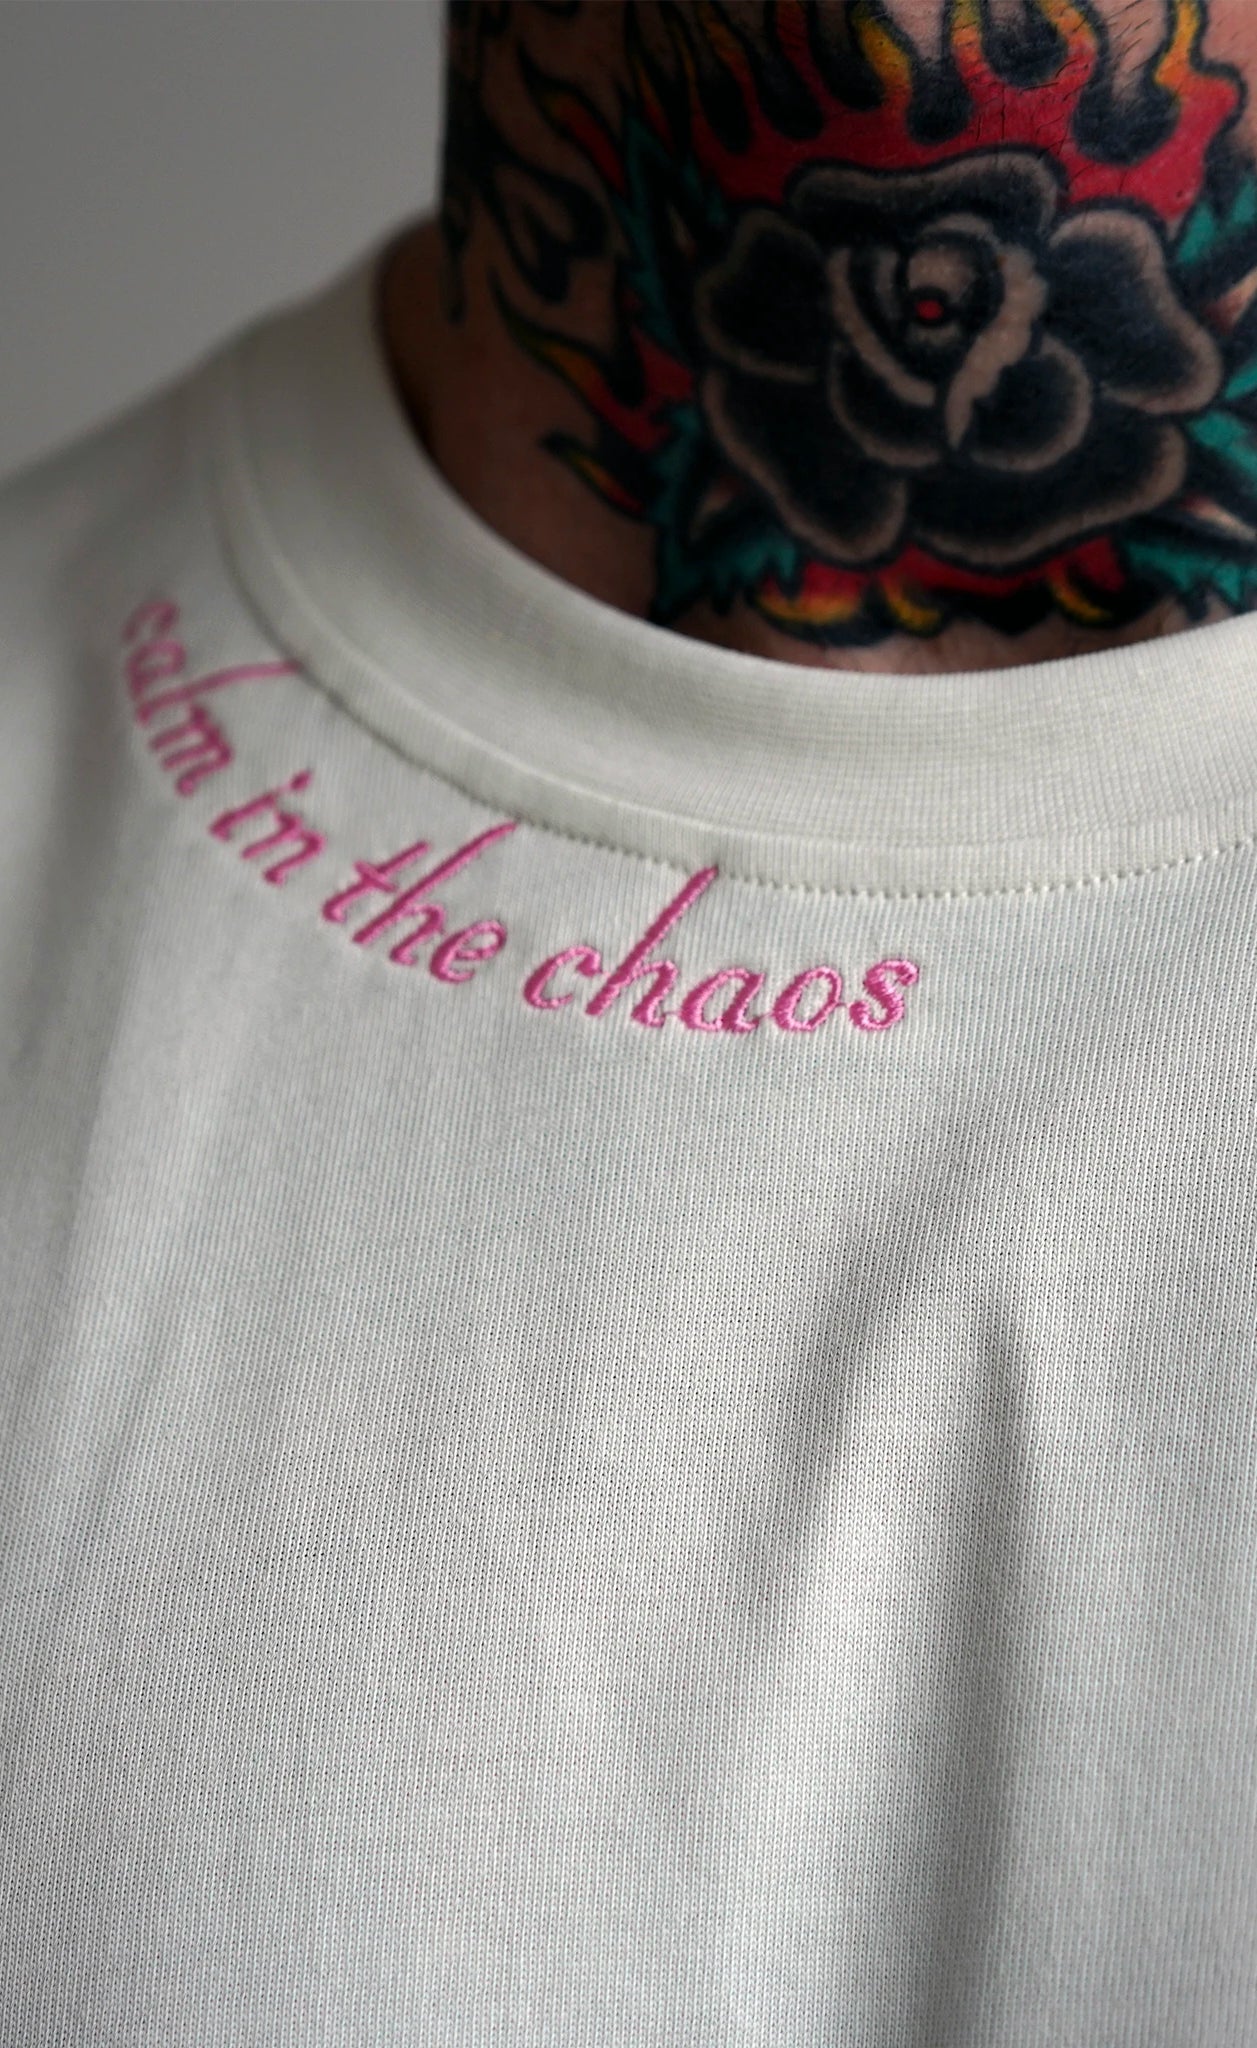 ODAAT Apparel, Calm In The Chaos T-Shirt, Vintage White